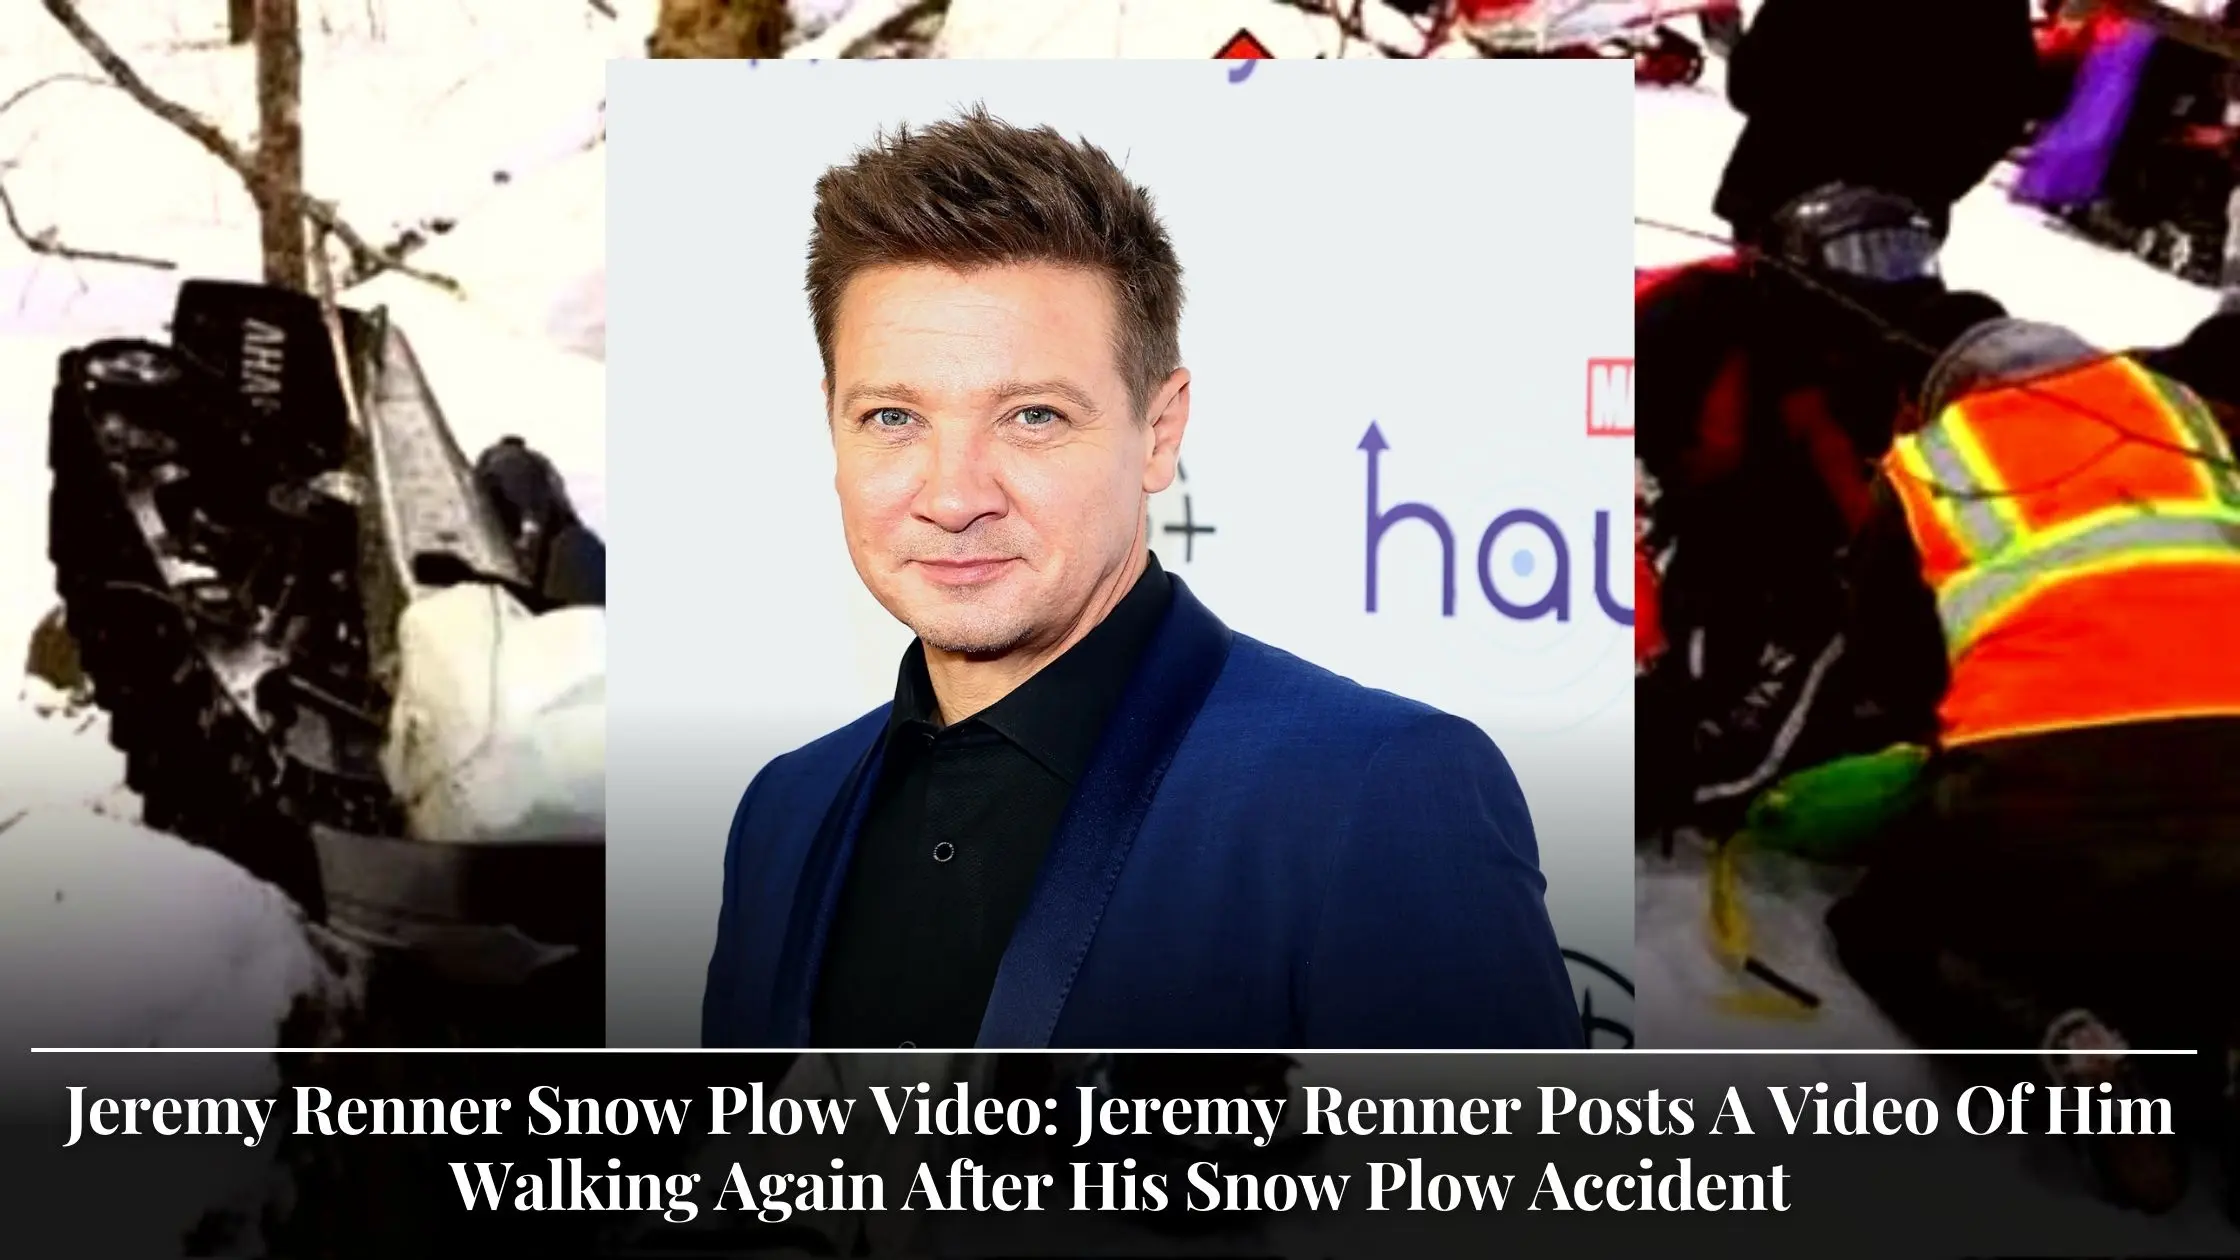 Jeremy Renner Snow Plow Video Jeremy Renner Posts A Video Of Him Walking Again After His Snow Plow Accident